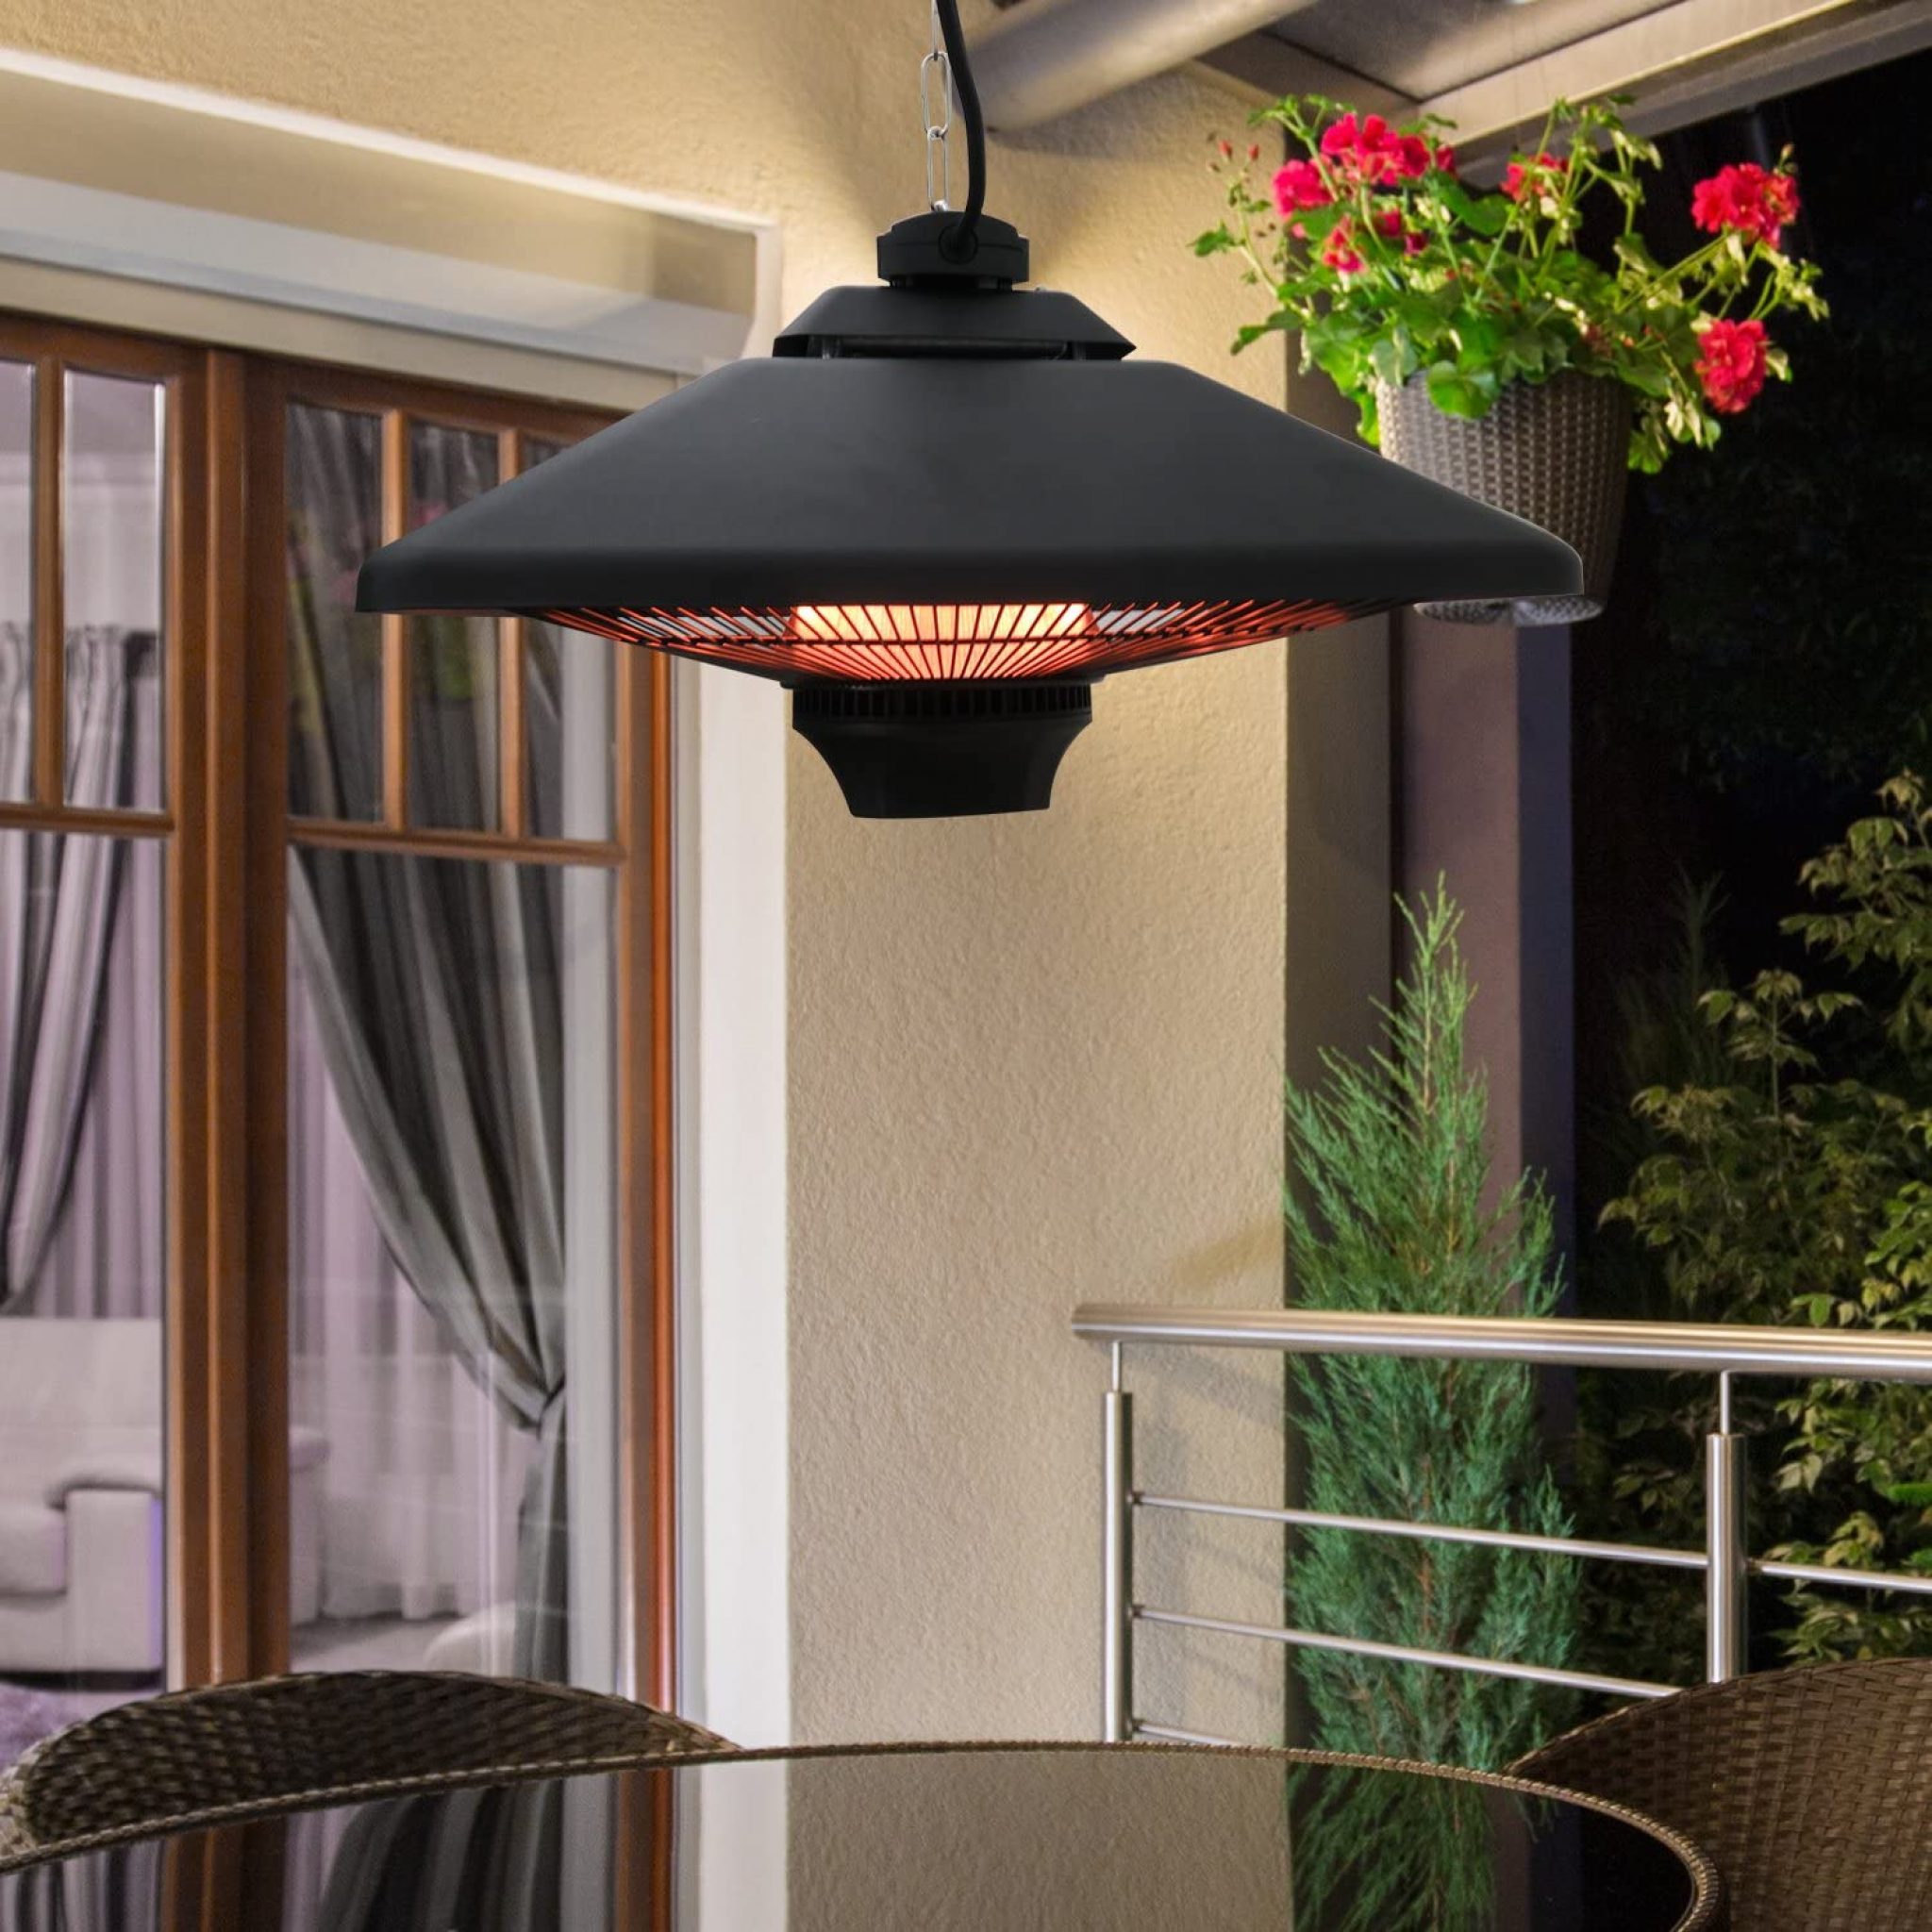 Outsunny 2kW Ceiling Mounted Weatherproof Electric Patio Heater PatioMate